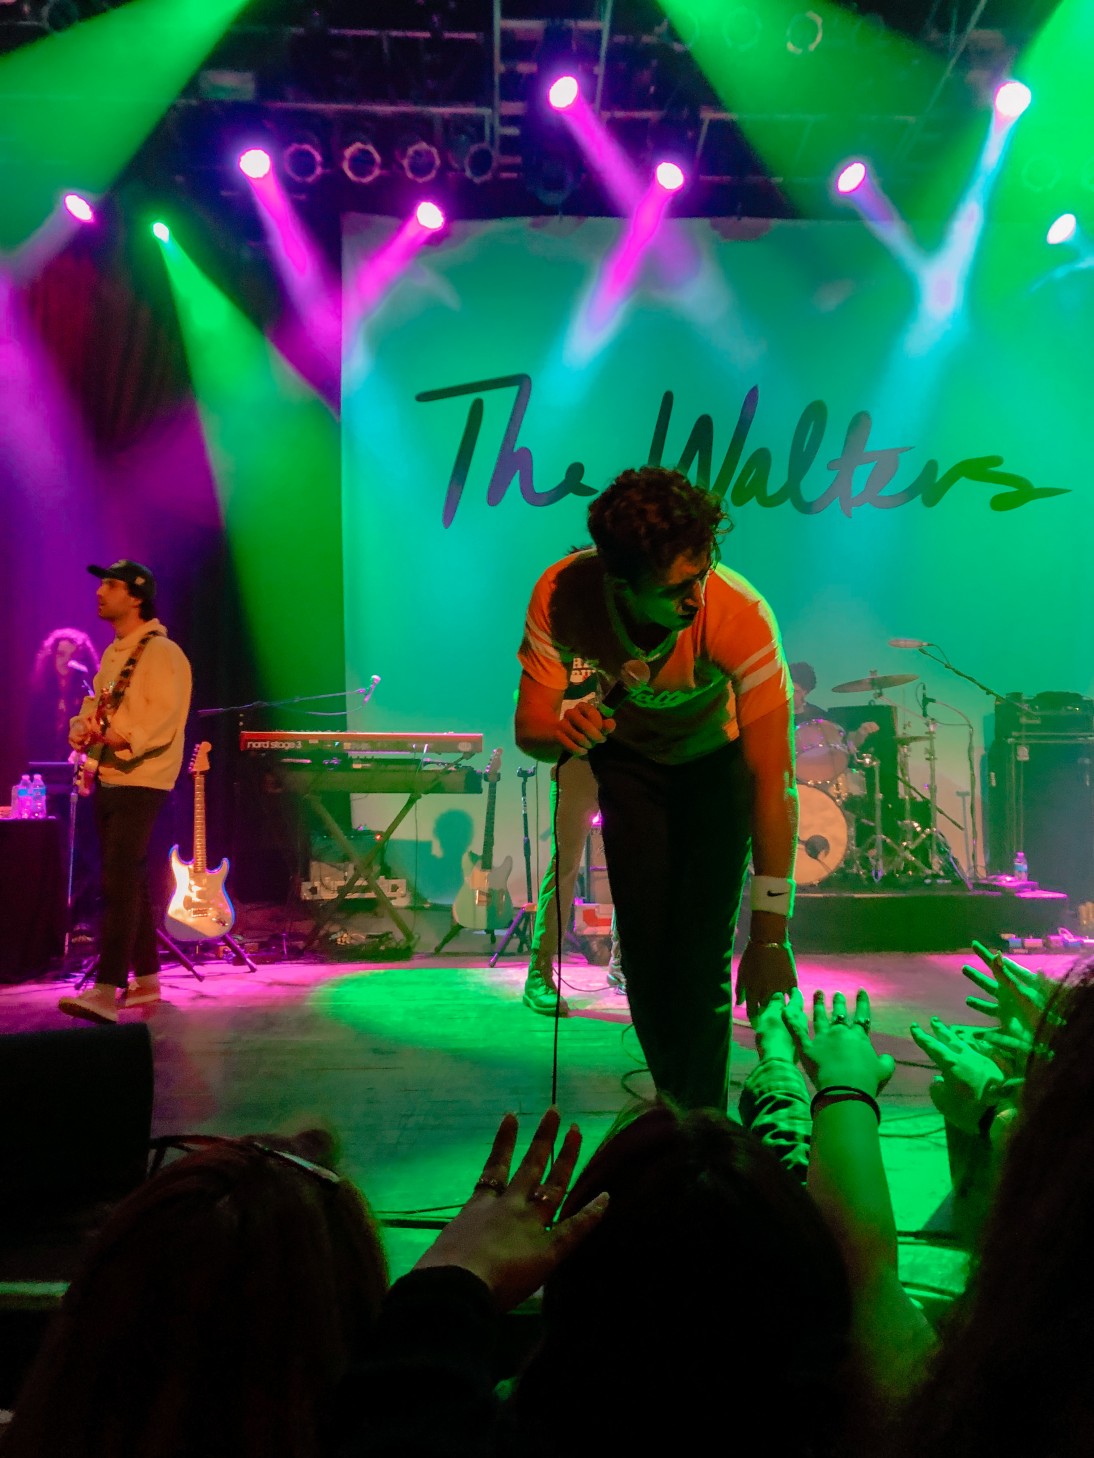 The Walters performing in front of colorful stage lights